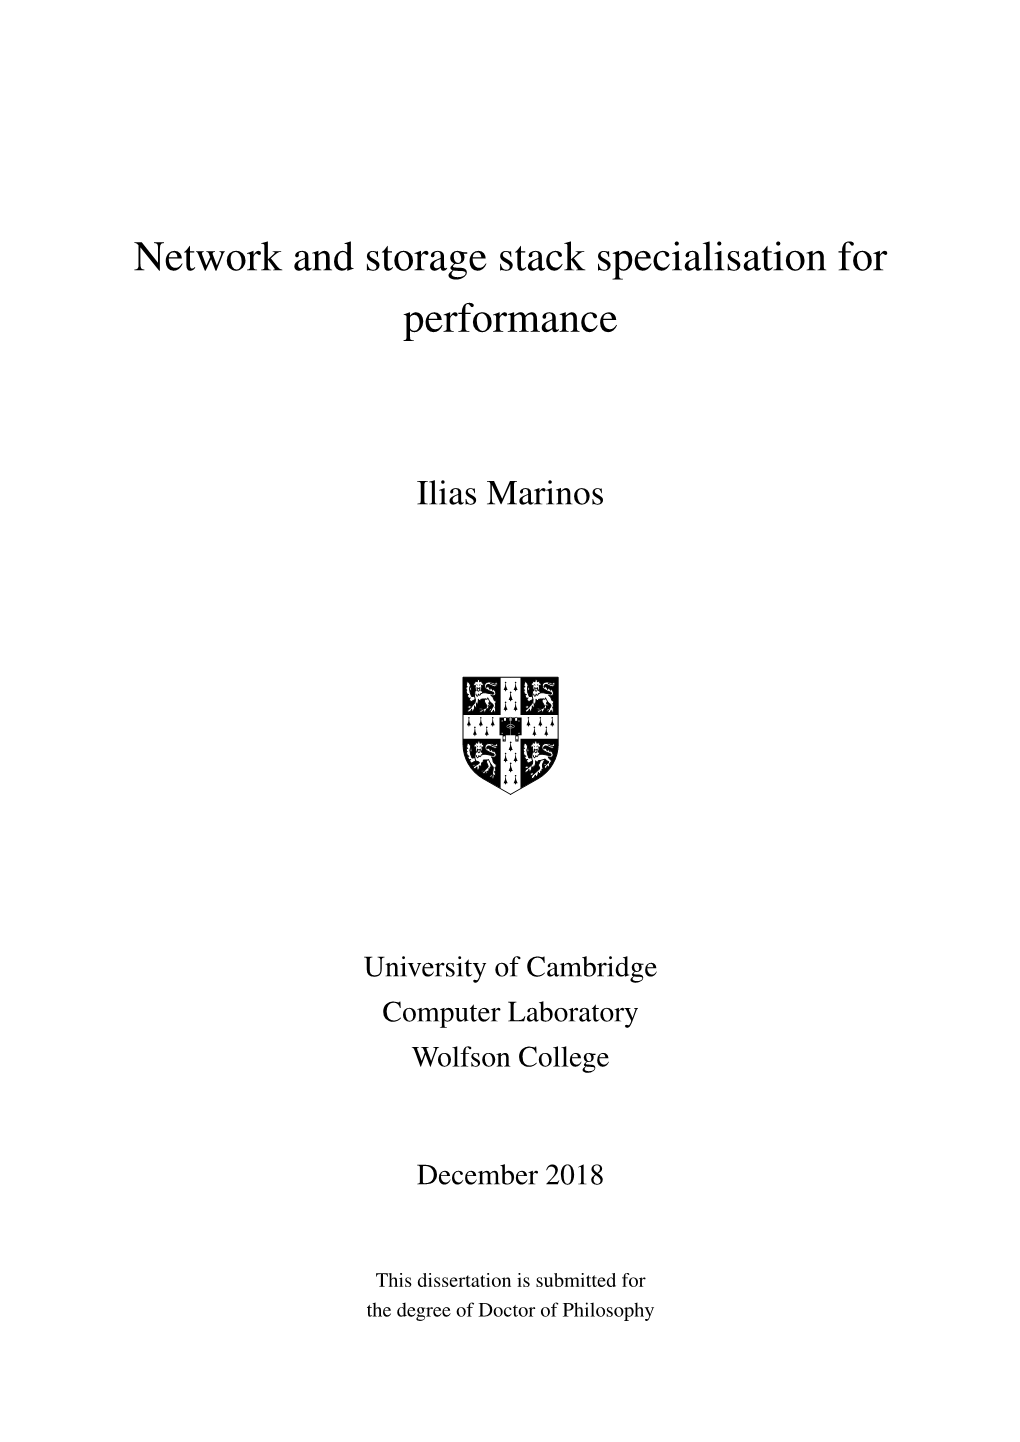 Network and Storage Stack Specialisation for Performance